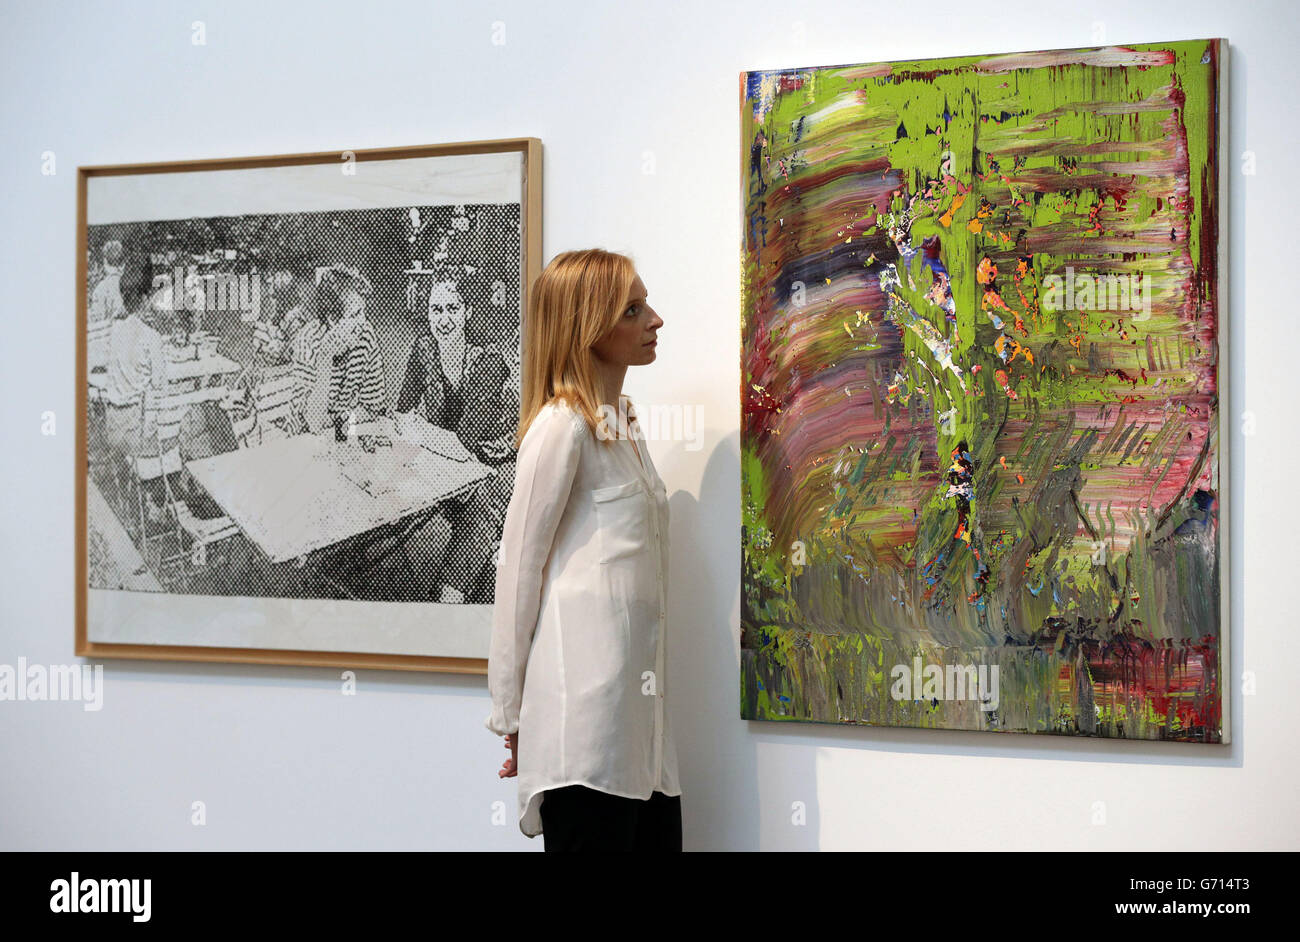 A Christie's employee stood between paintings by Sigmar Polke (left), Biertisch, 1999, and Gerhard Richter, Abstraktes Bild, 1989, during a press view of the Polke/Richter-Richter/Polke exhibition - celebrating Gerhard Richter (b.1932) and Sigmar Polke (1941-2010) by bringing together 65 works from 30 collections to create the artists' first joint show in almost 50 years - at Christie's Mayfair, in London. Stock Photo